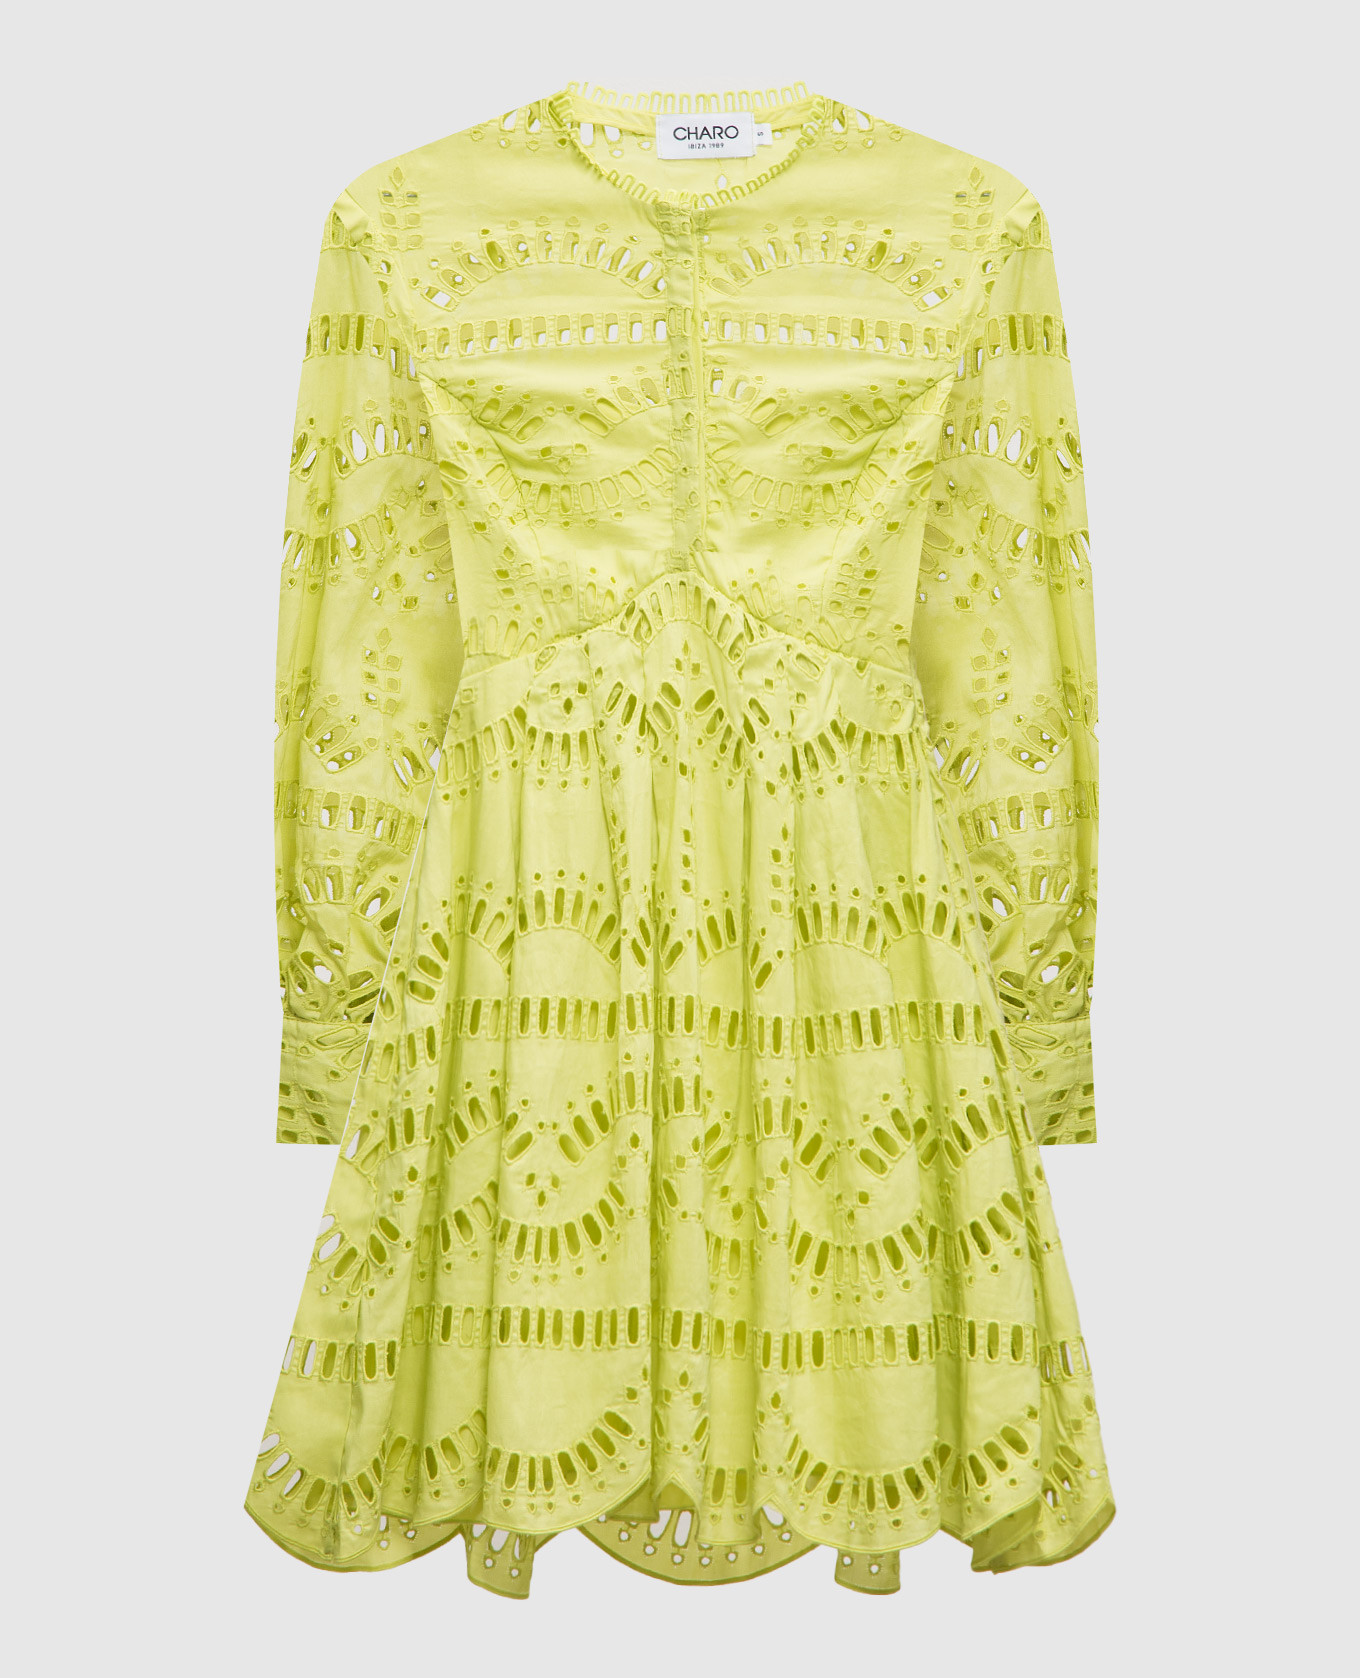 Franca green shirt dress with broderie embroidery